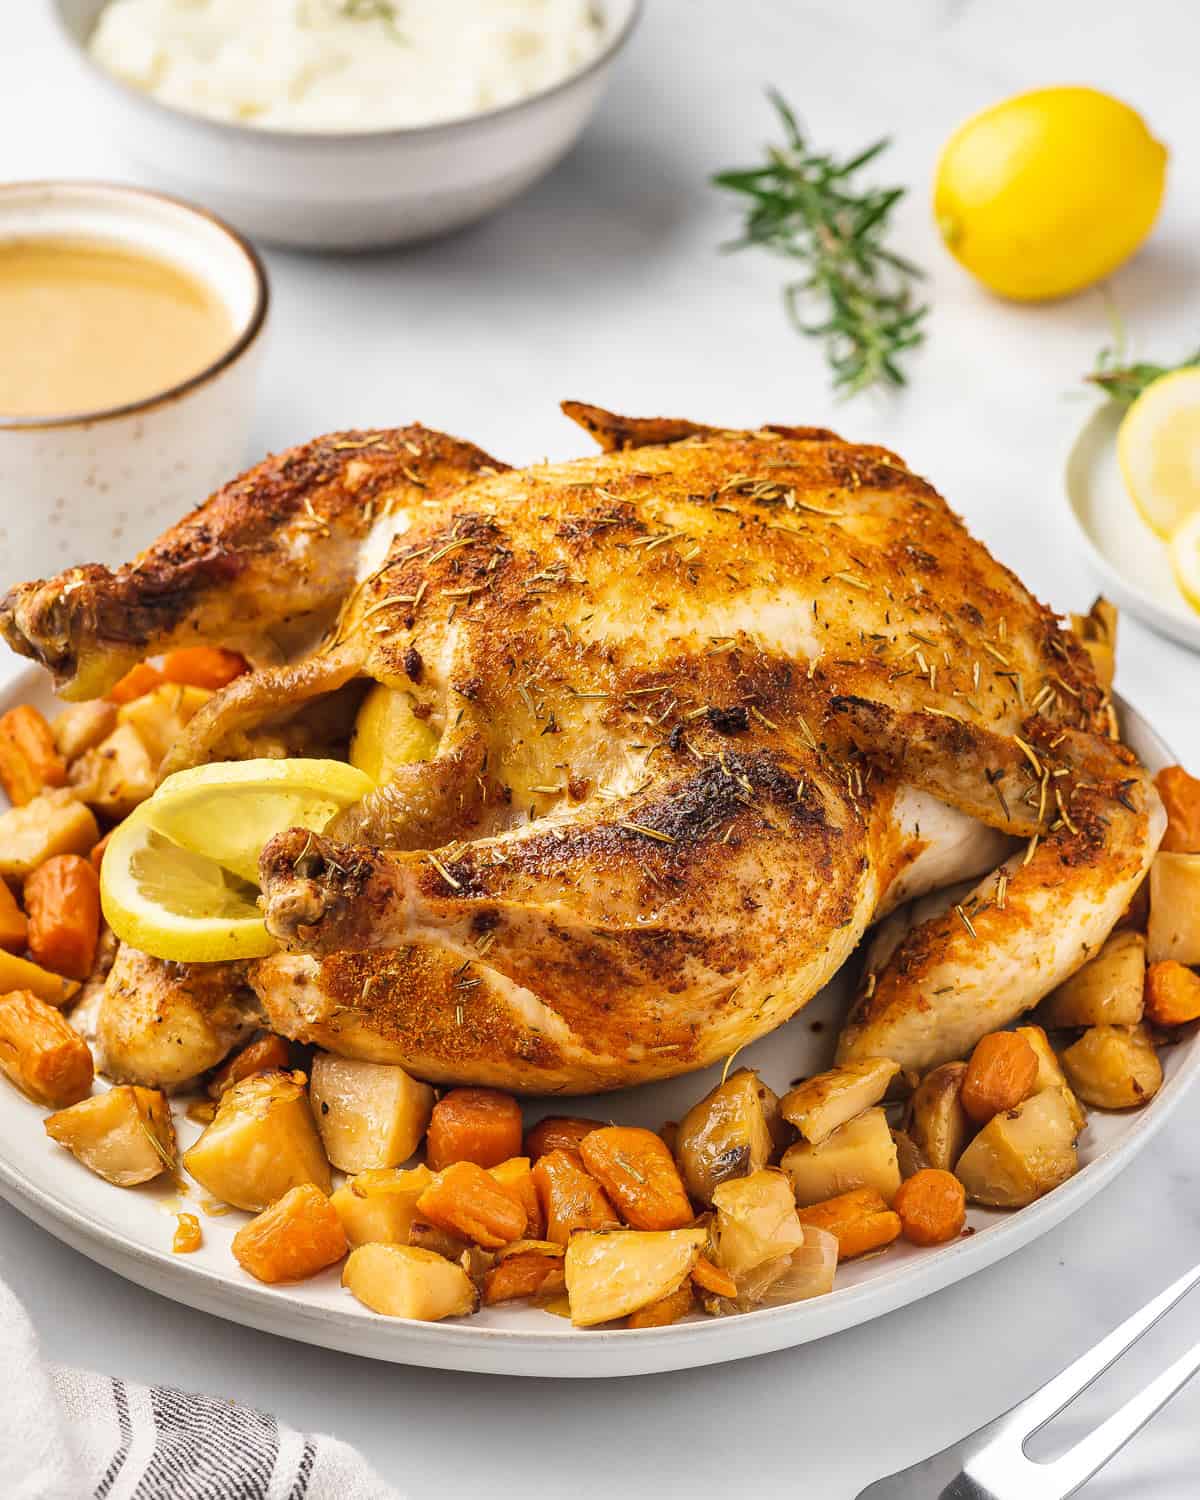 A slow cooker whole chicken surrounded by root vegetables on a large serving plate.